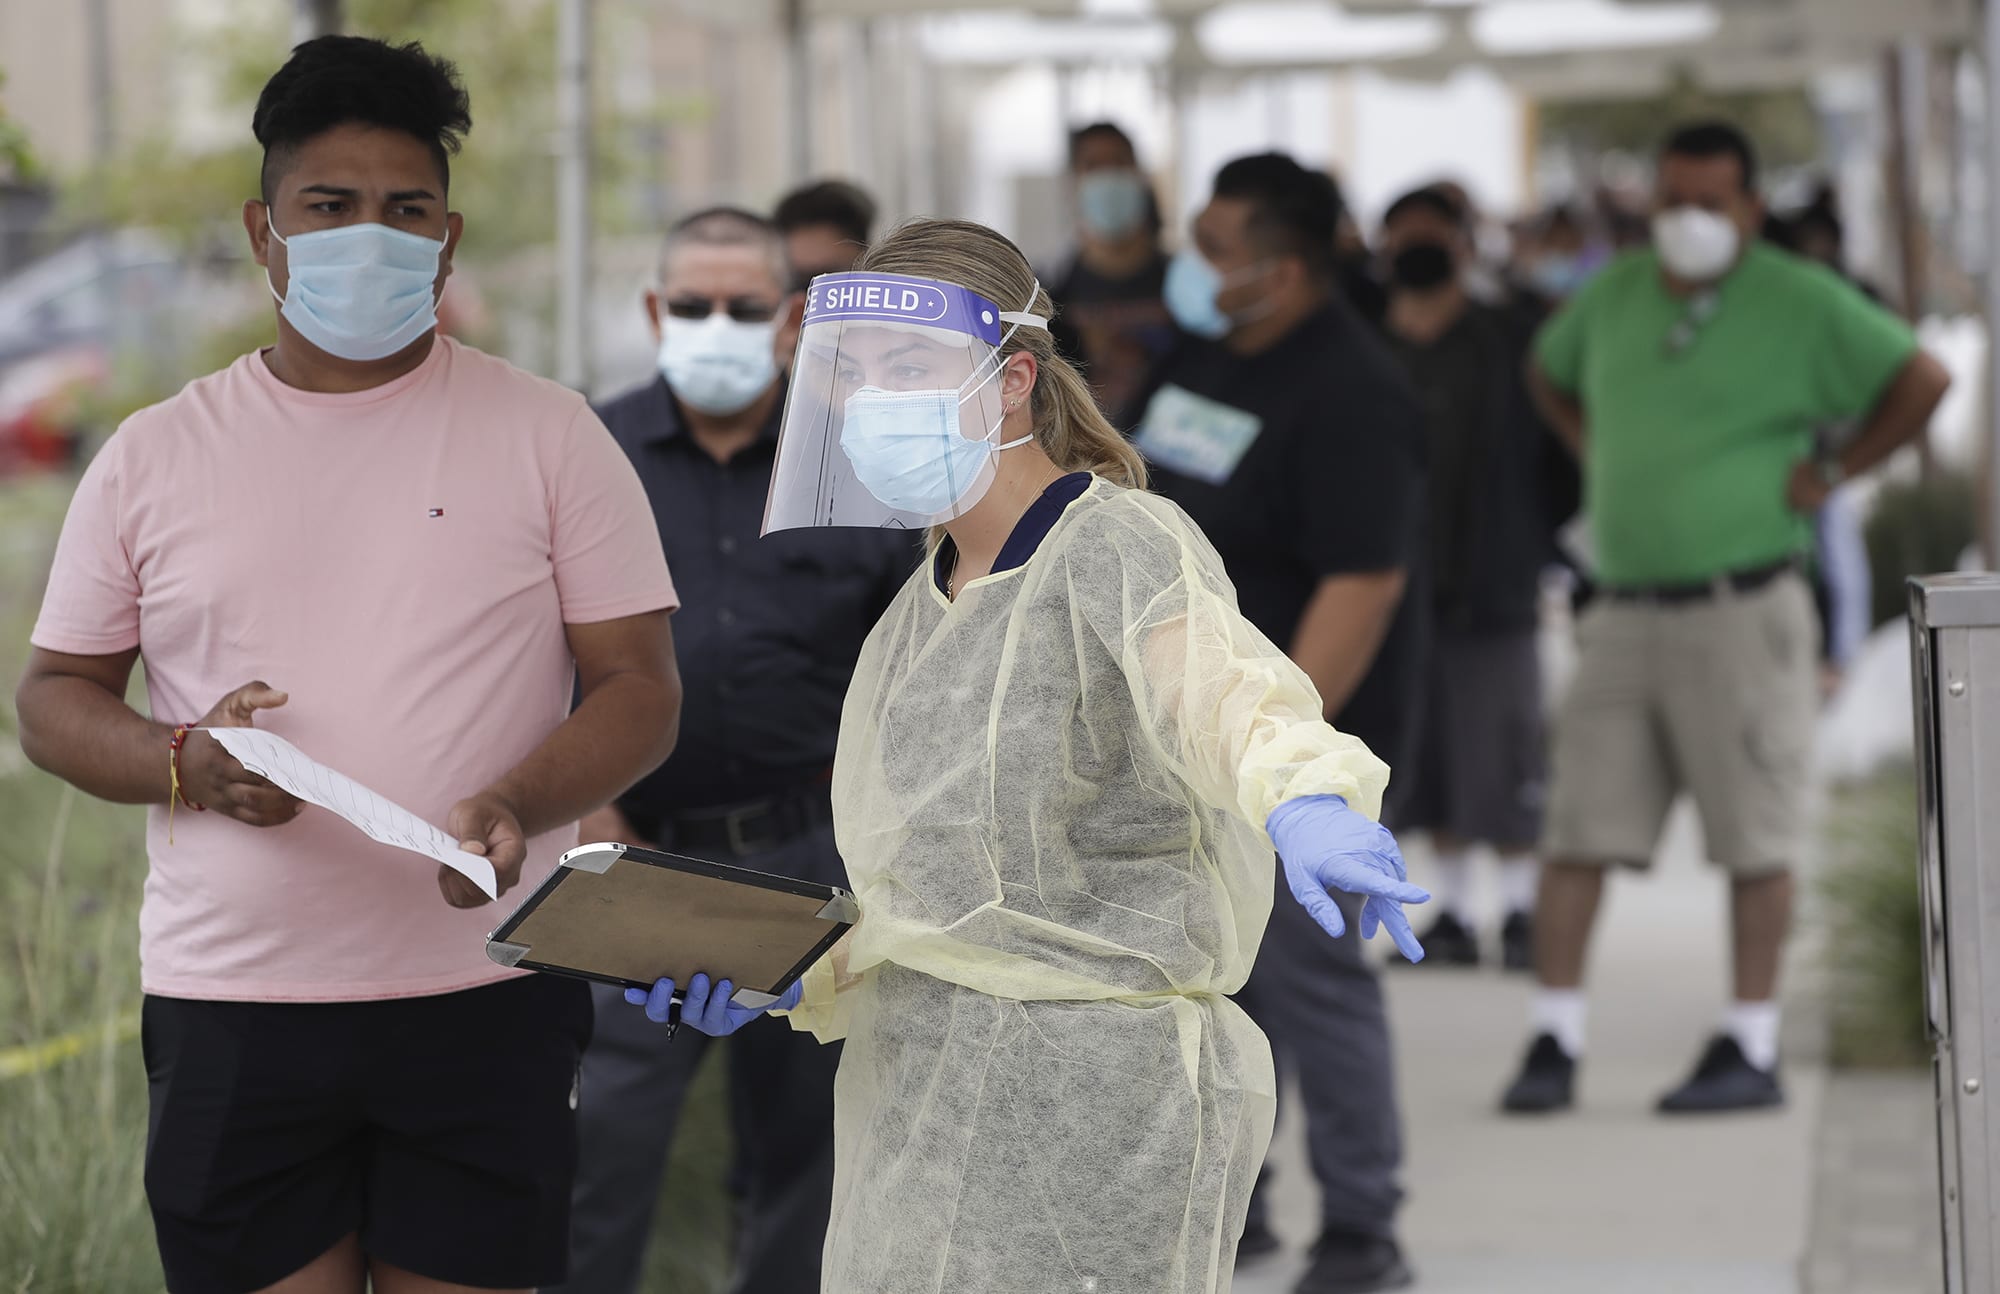 eople line up behind a health care worker at a mobile coronavirus testing site on July 22 at the Charles Drew University of Medicine and Science in Los Angeles.